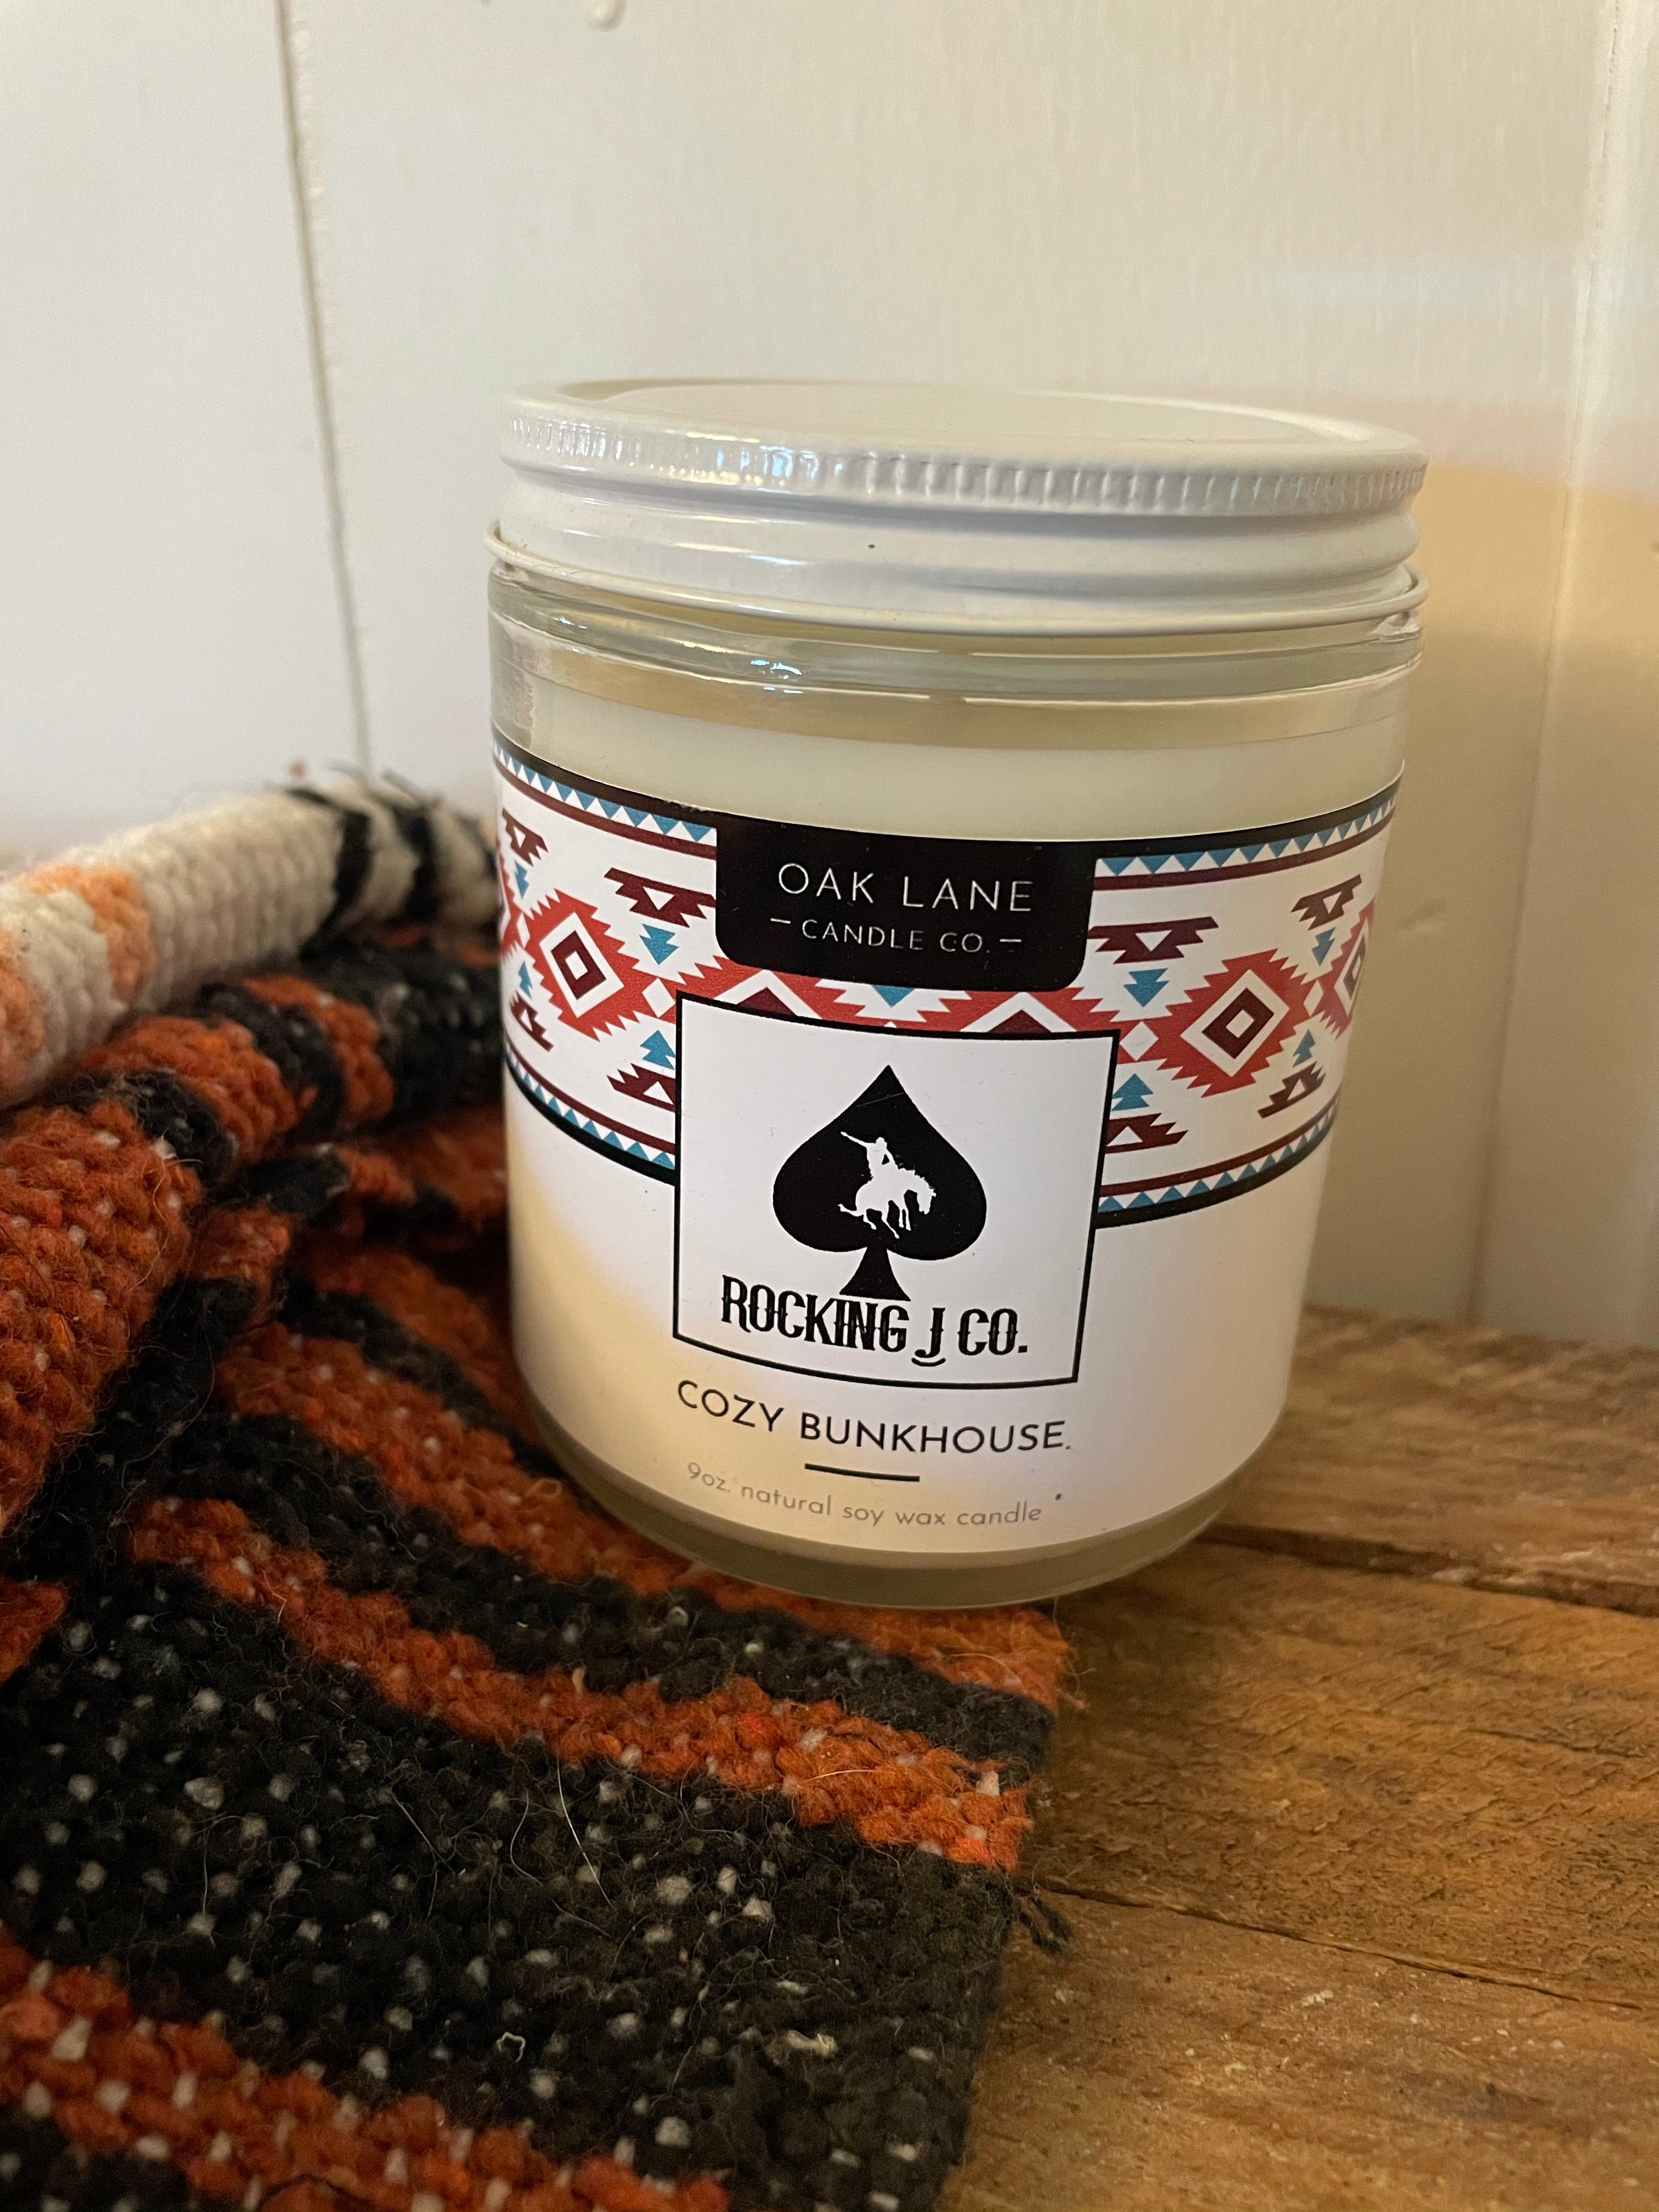 The Cozy Bunkhouse Candle